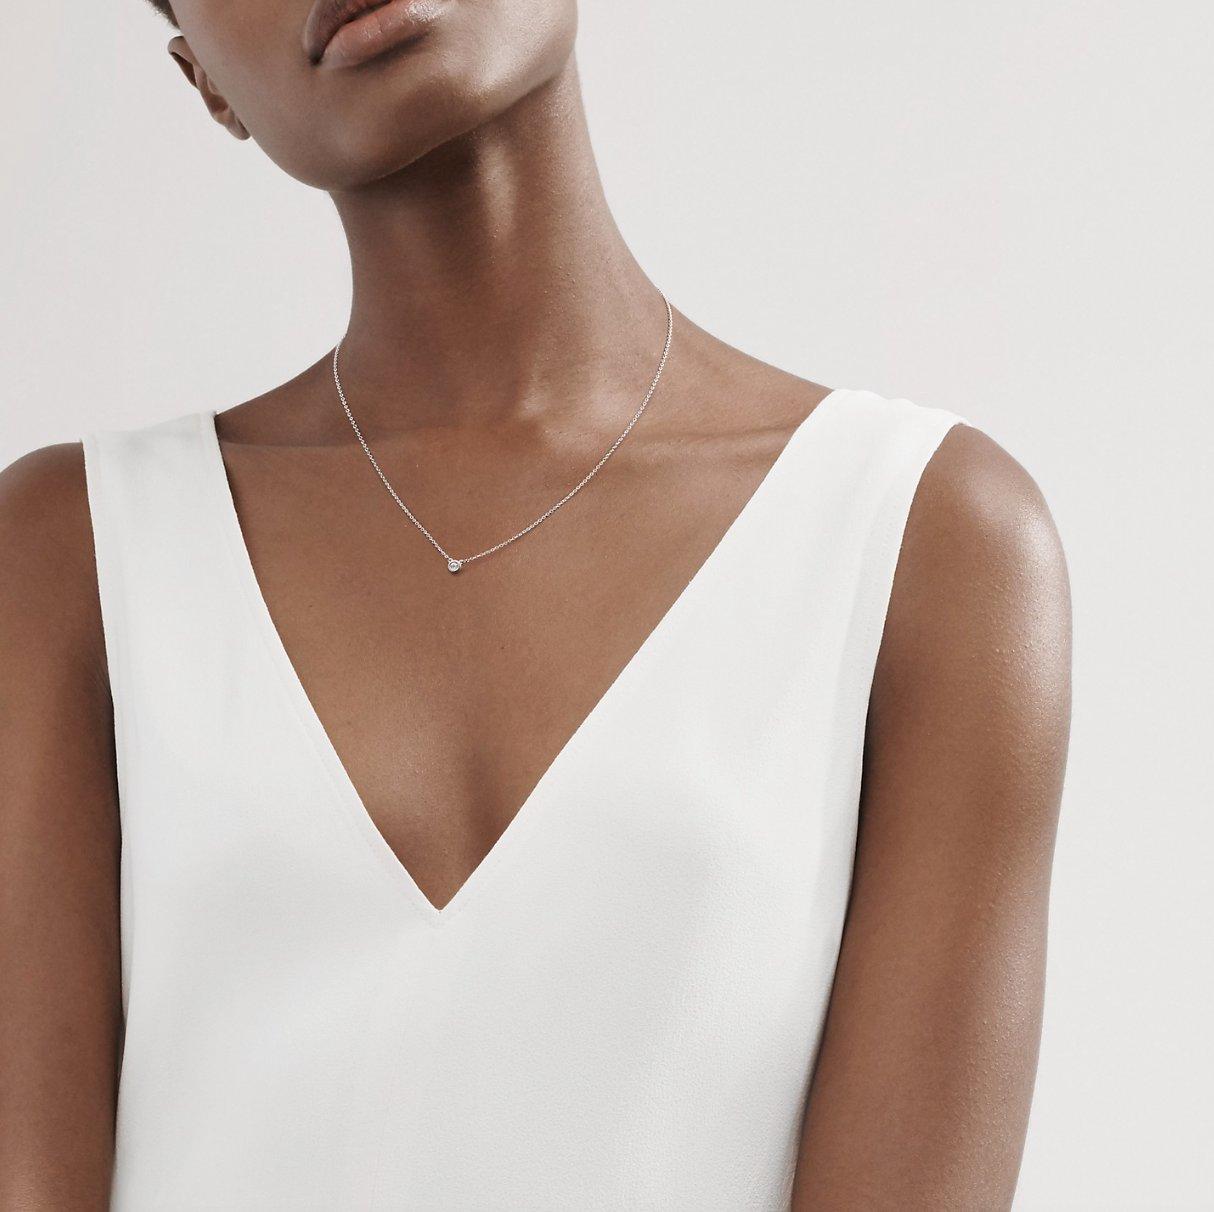 Black woman with short hair wearing a v-necked white top and delicate silver and aquamarine pendant necklace